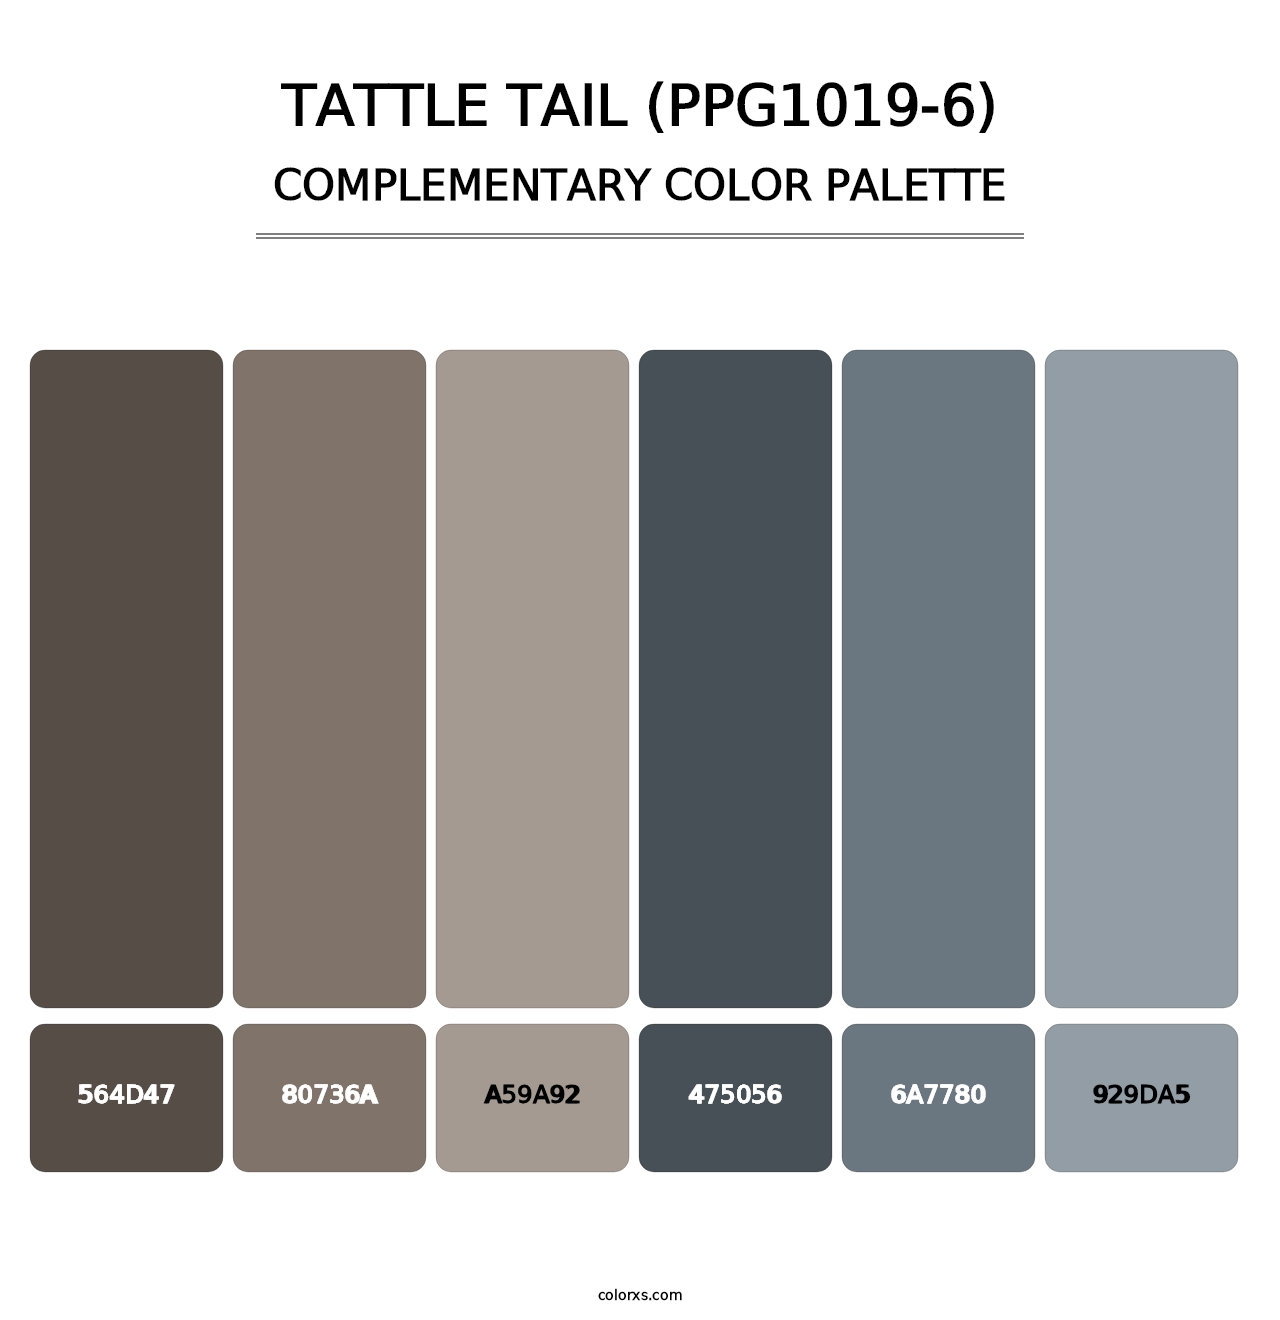 Tattle Tail (PPG1019-6) - Complementary Color Palette